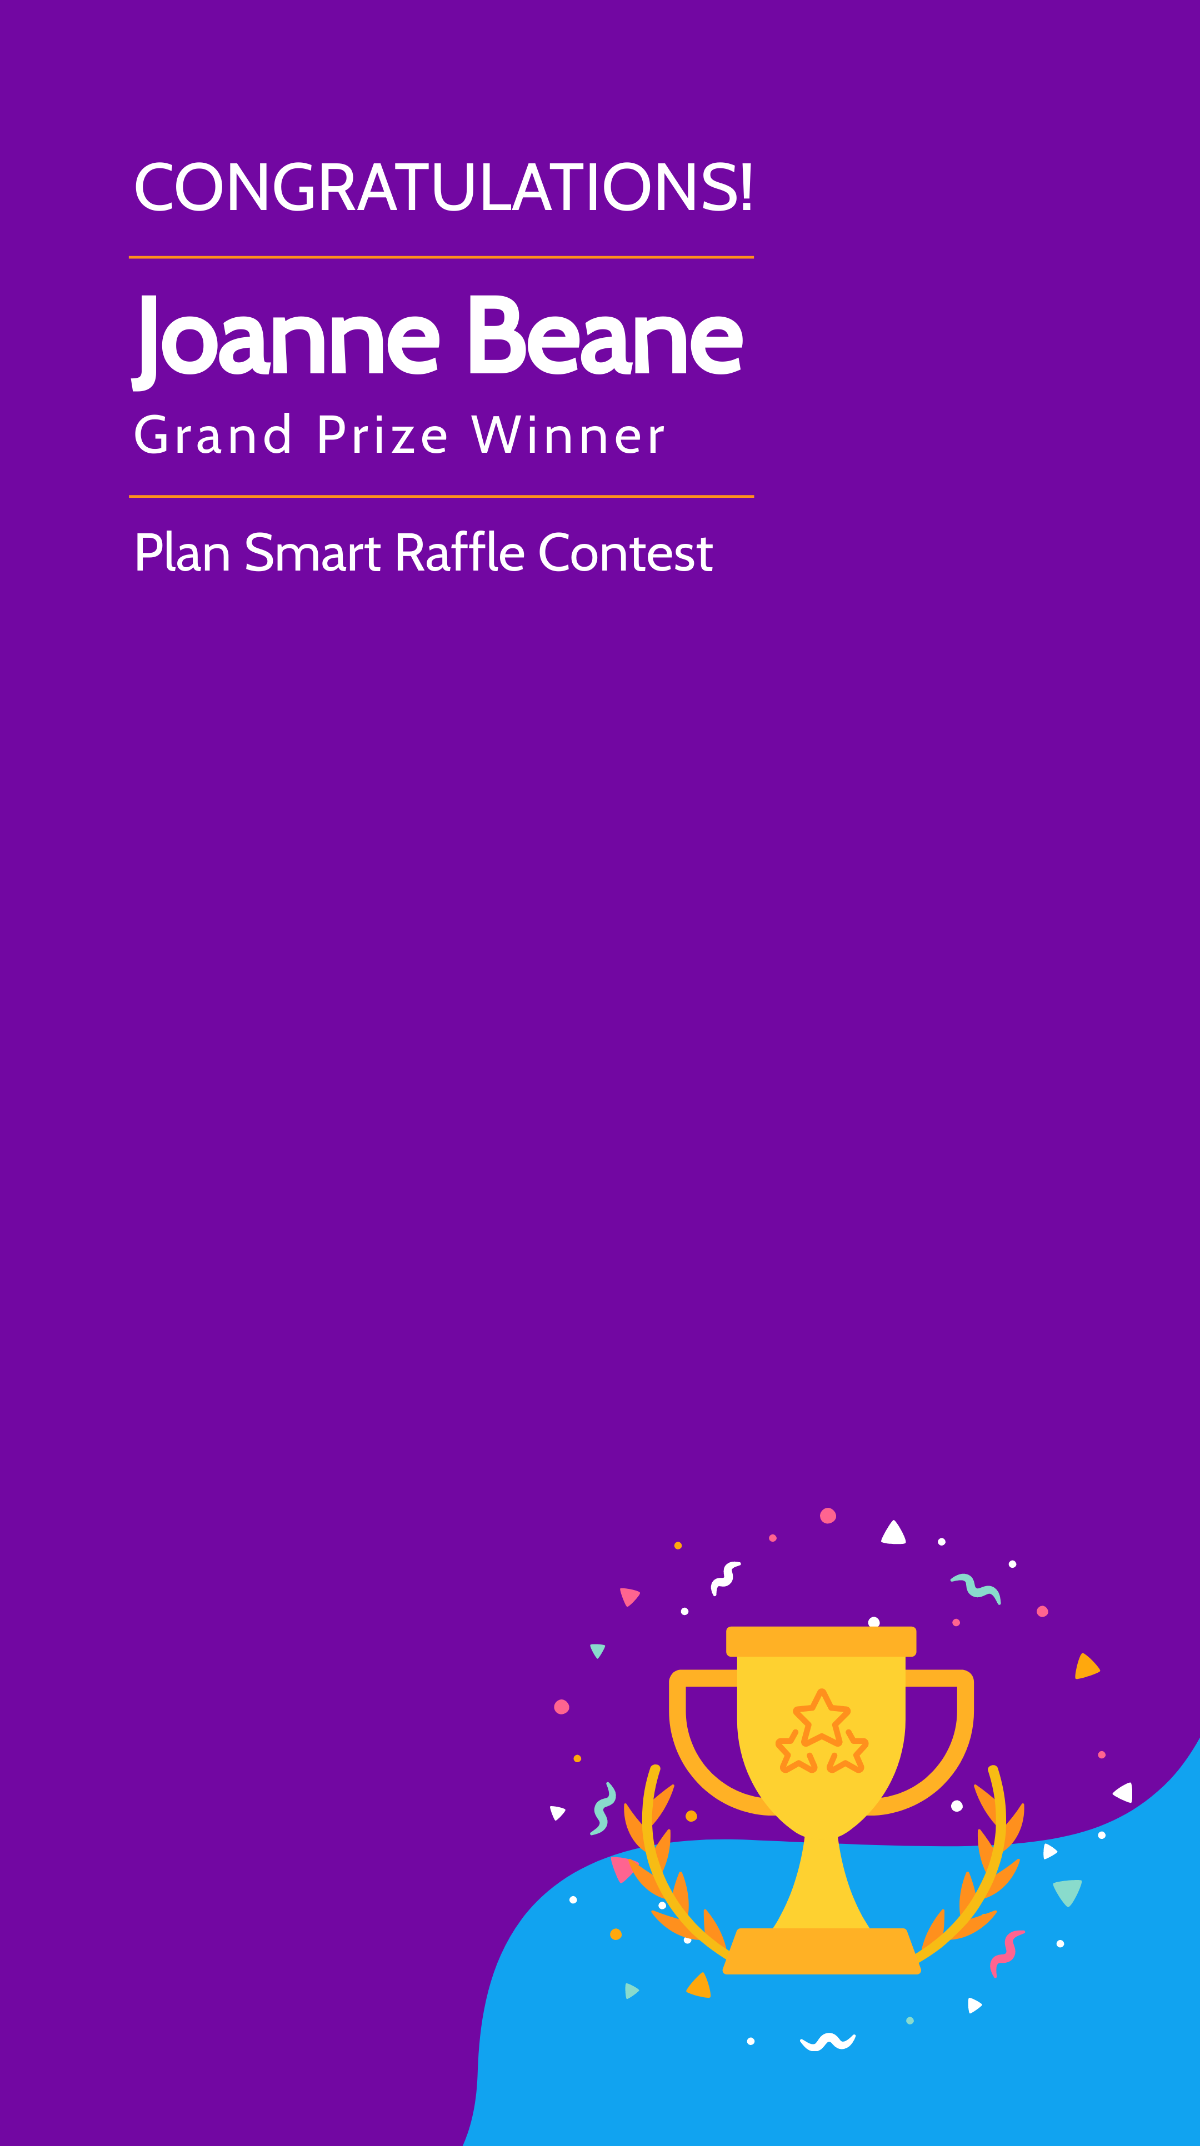 Free Contest Winner Announcement Snapchat Geofilter Template